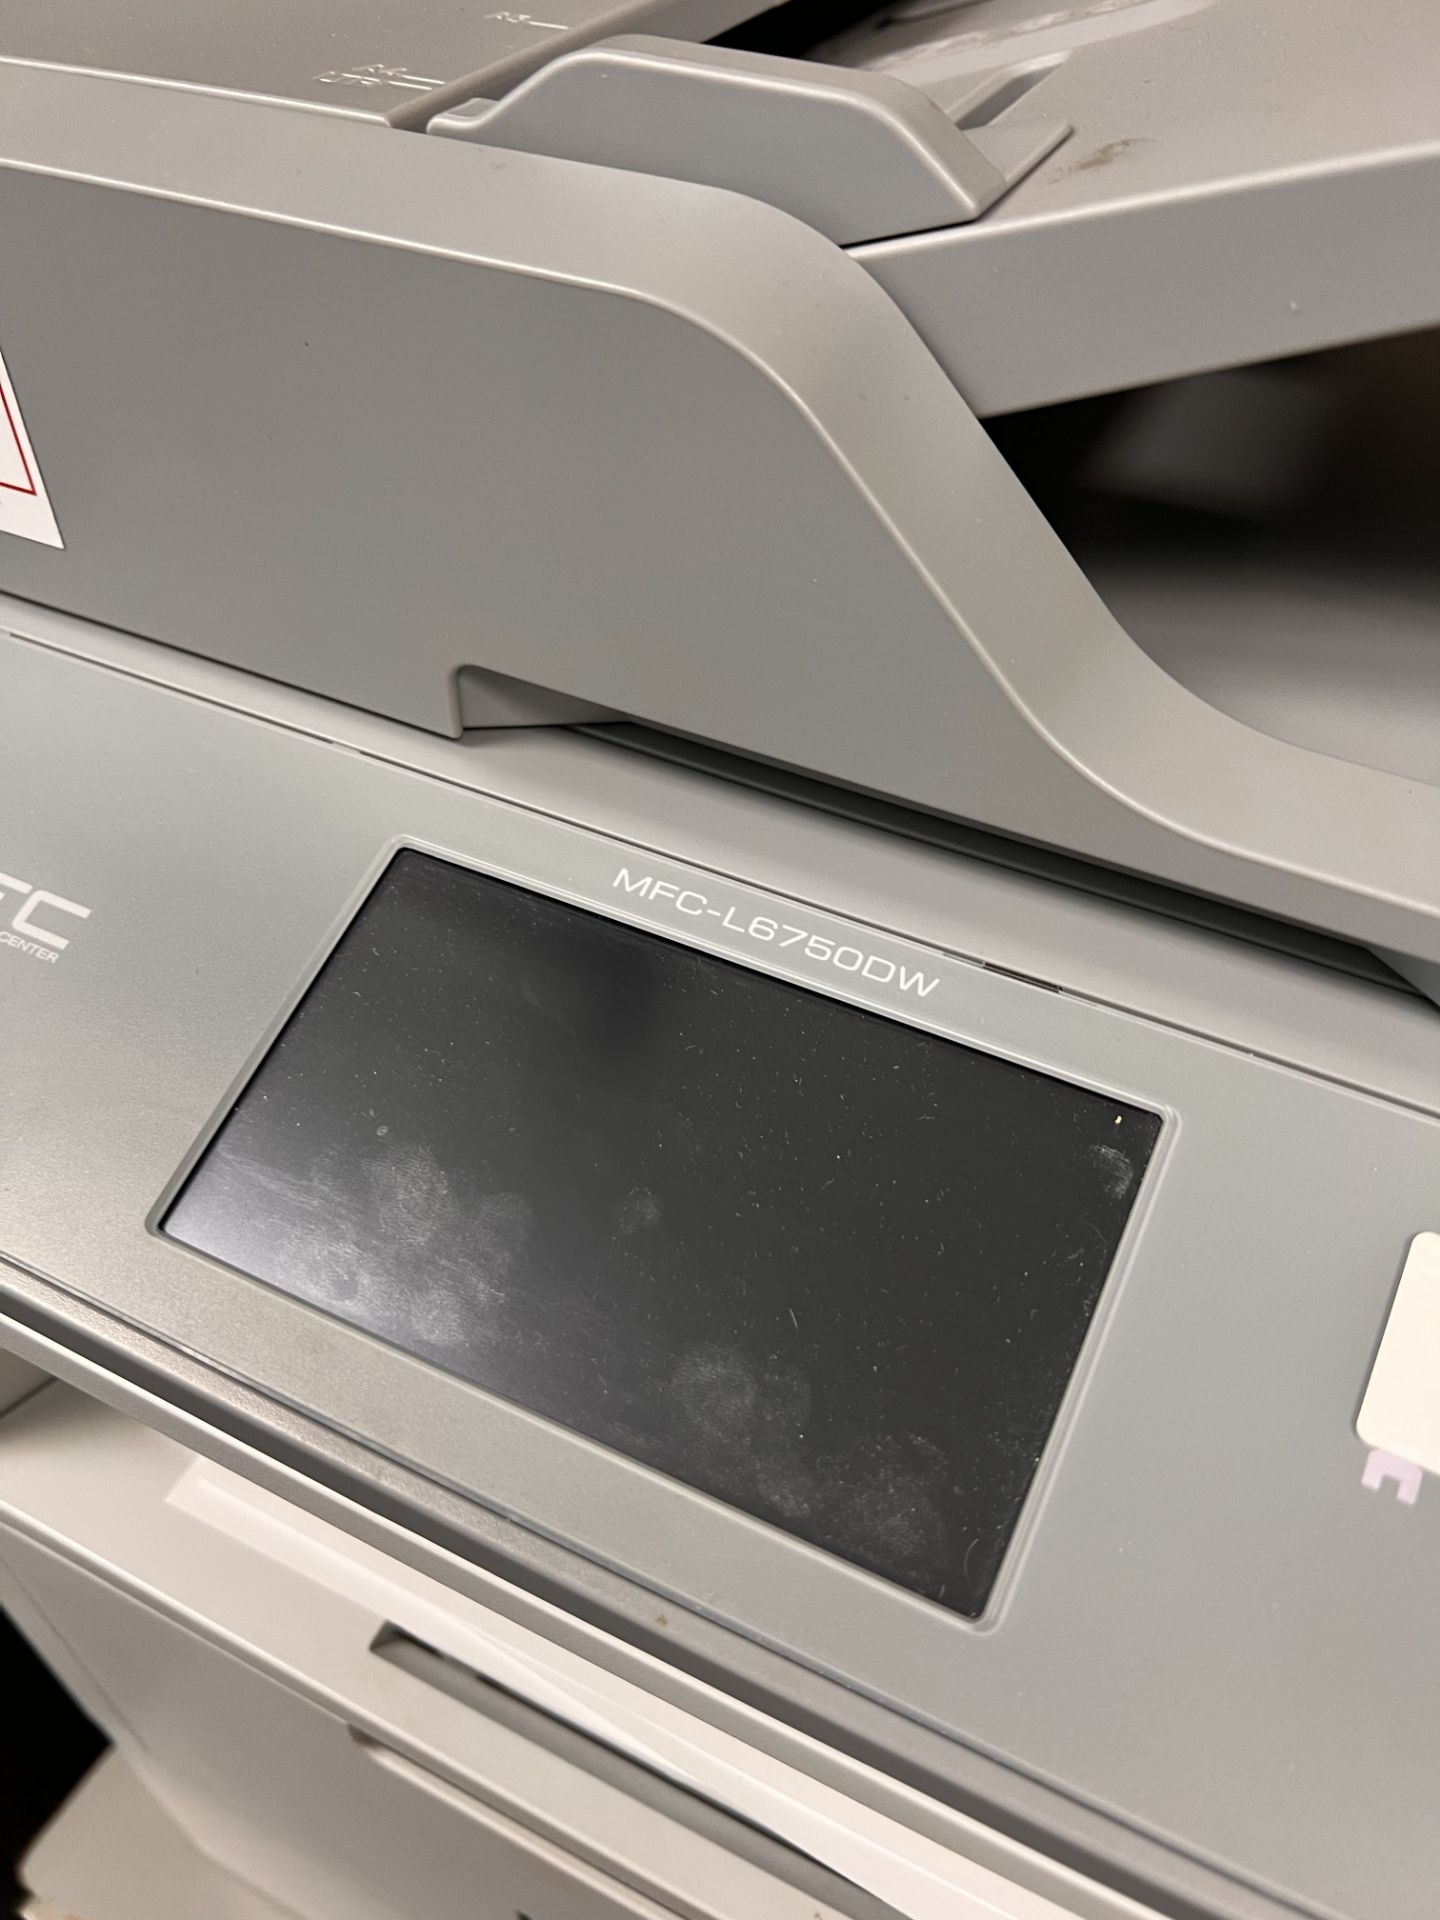 BROTHER MFC-L6750DW COPIER/PRINTER - Image 3 of 5